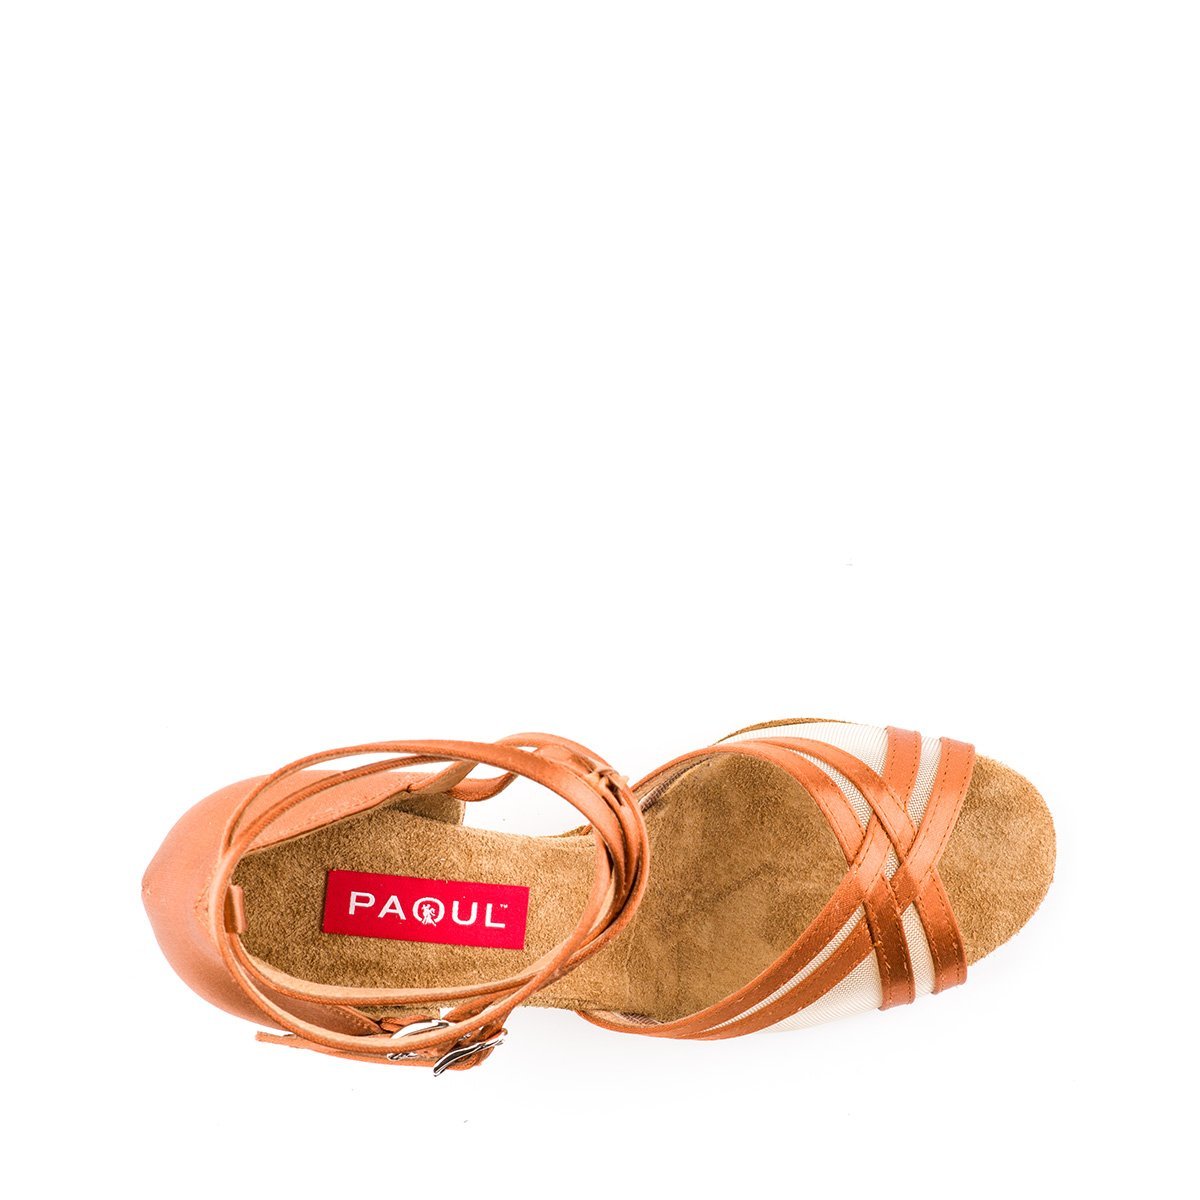 Top view of tan satin shoes for Latin dancing